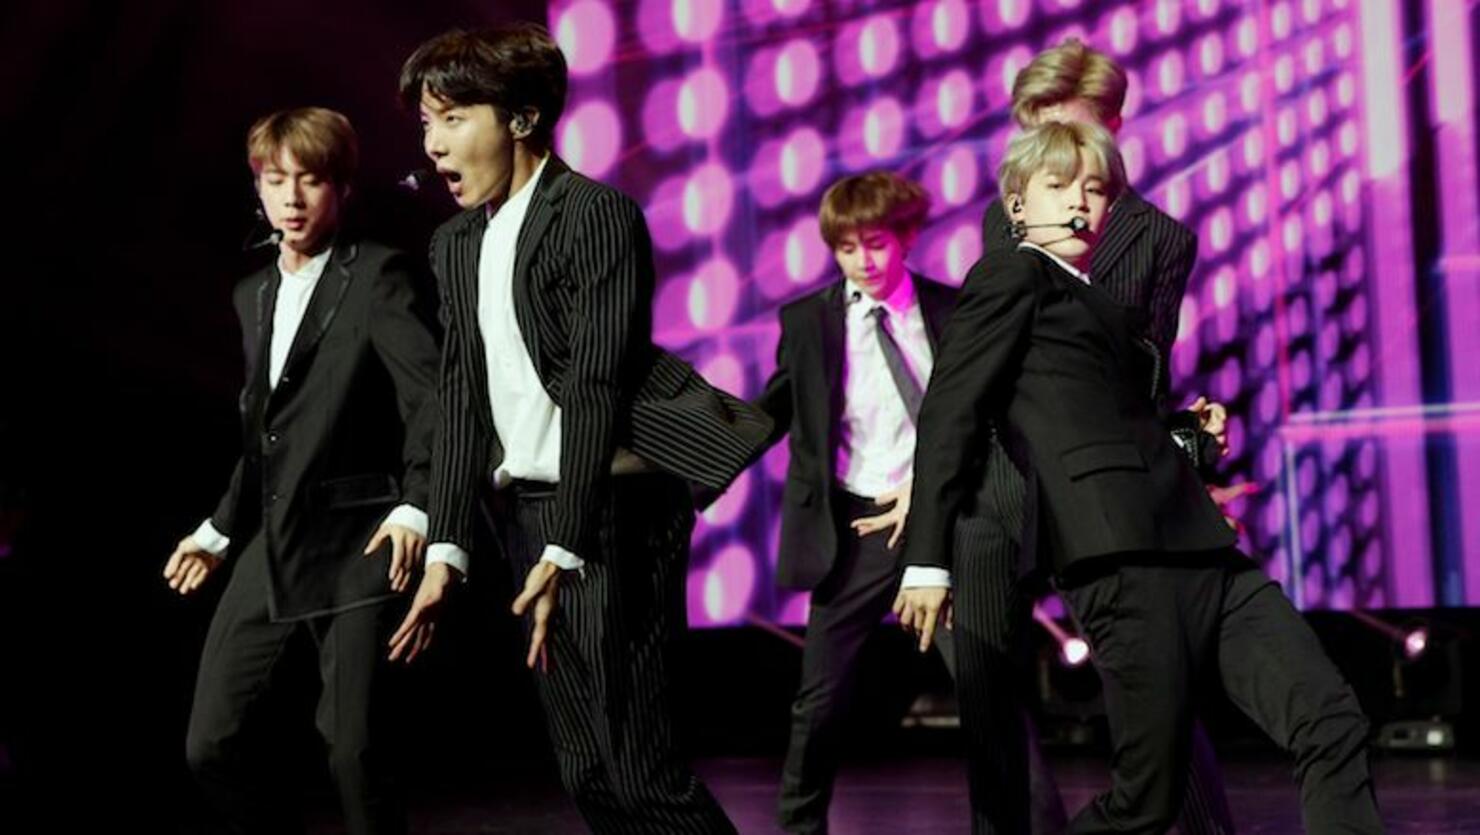 Bts To Make Saturday Night Live Debut In April Iheartradio